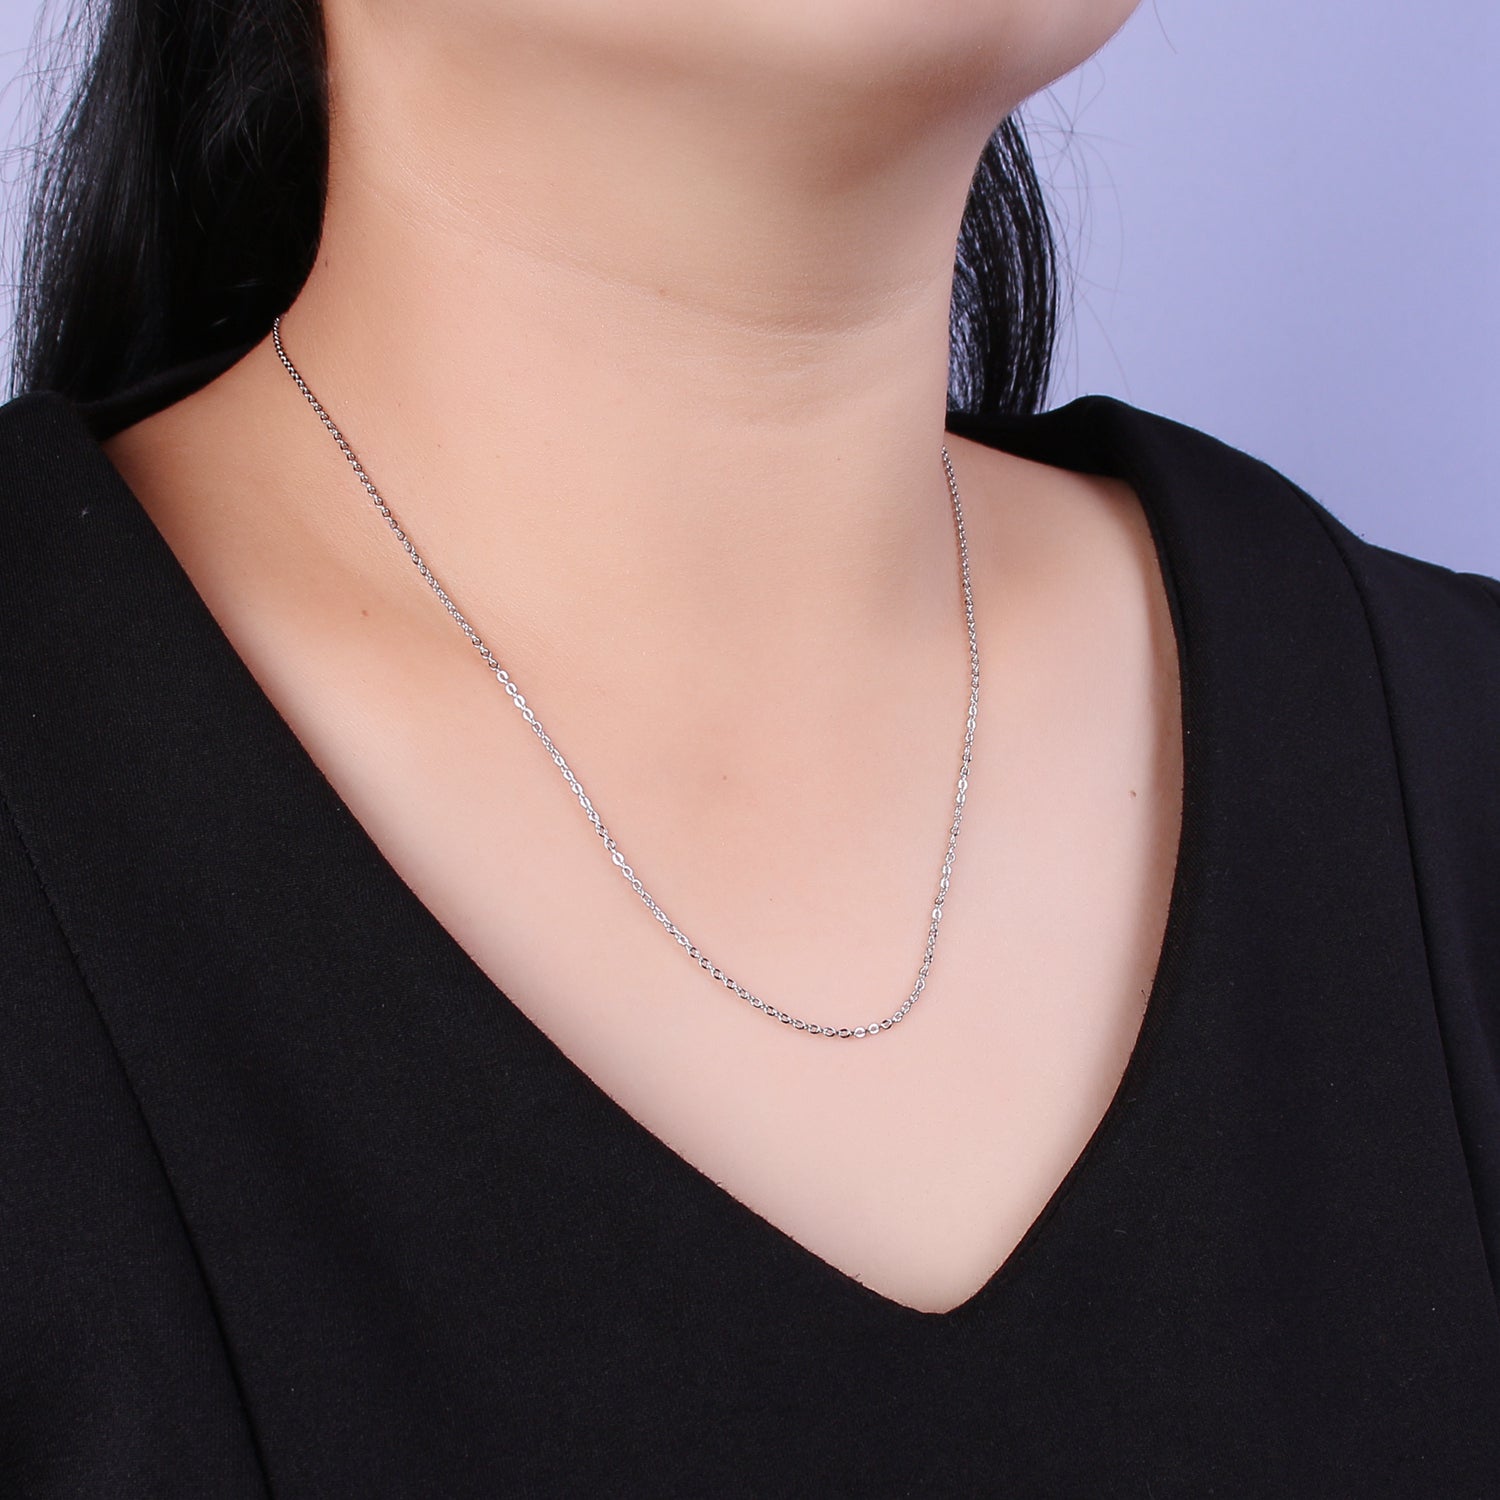 Dainty Gold Chain Necklace // 18k Gold Filled Chain /  Simple and Pretty • Layering Necklace 18 inch CN1257 - DLUXCA